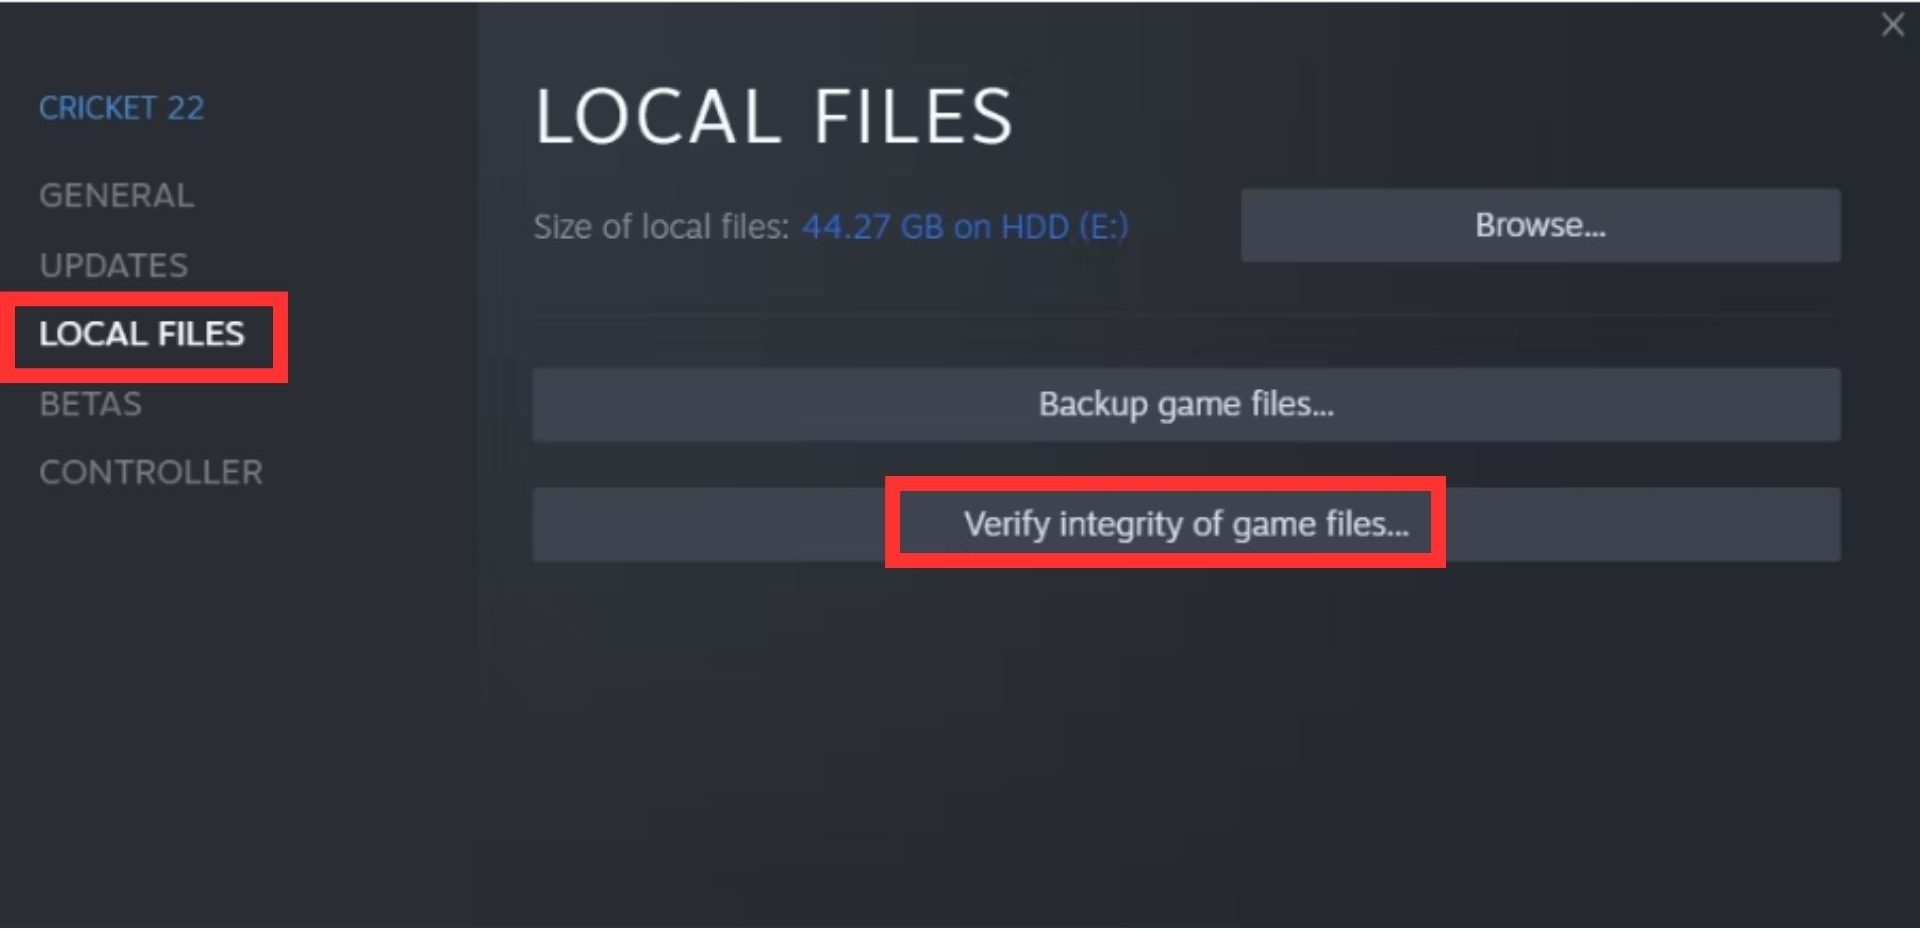 Verify the integrity of game files through the game's platform or through file verification software.
Replace any corrupted or missing files.